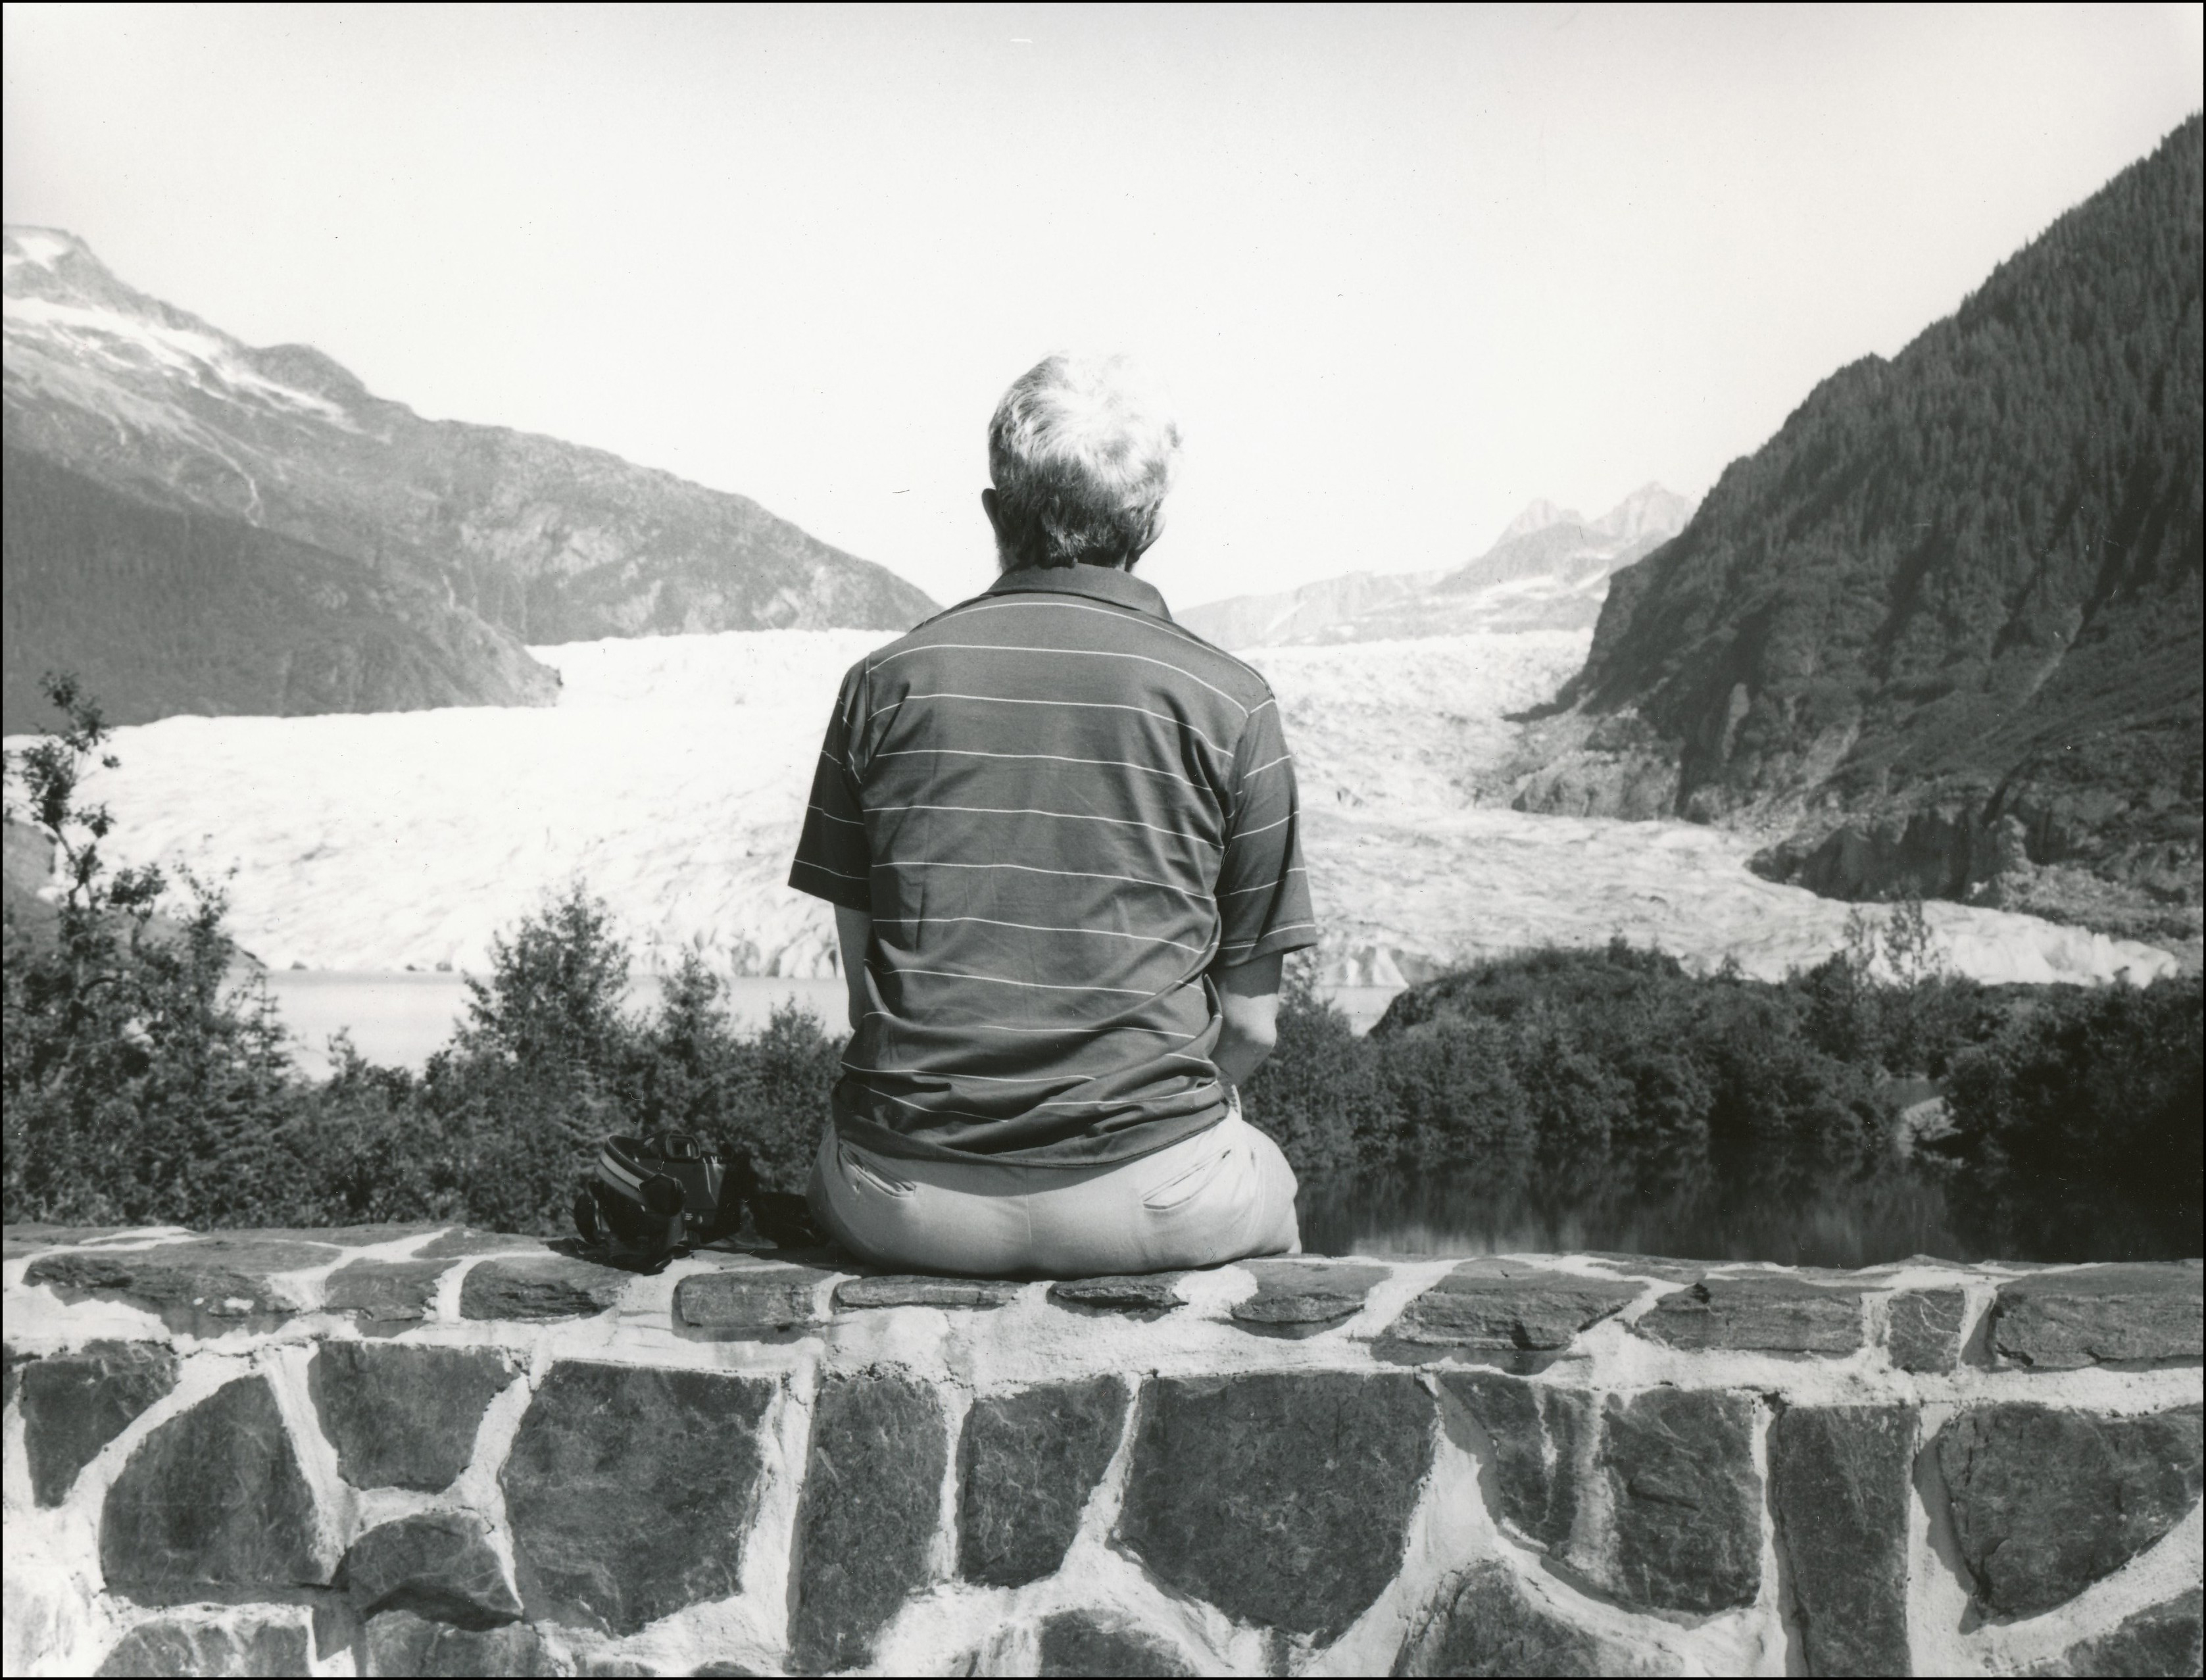 Man sitting on stone wall looking out at large glacier inbetween mountains